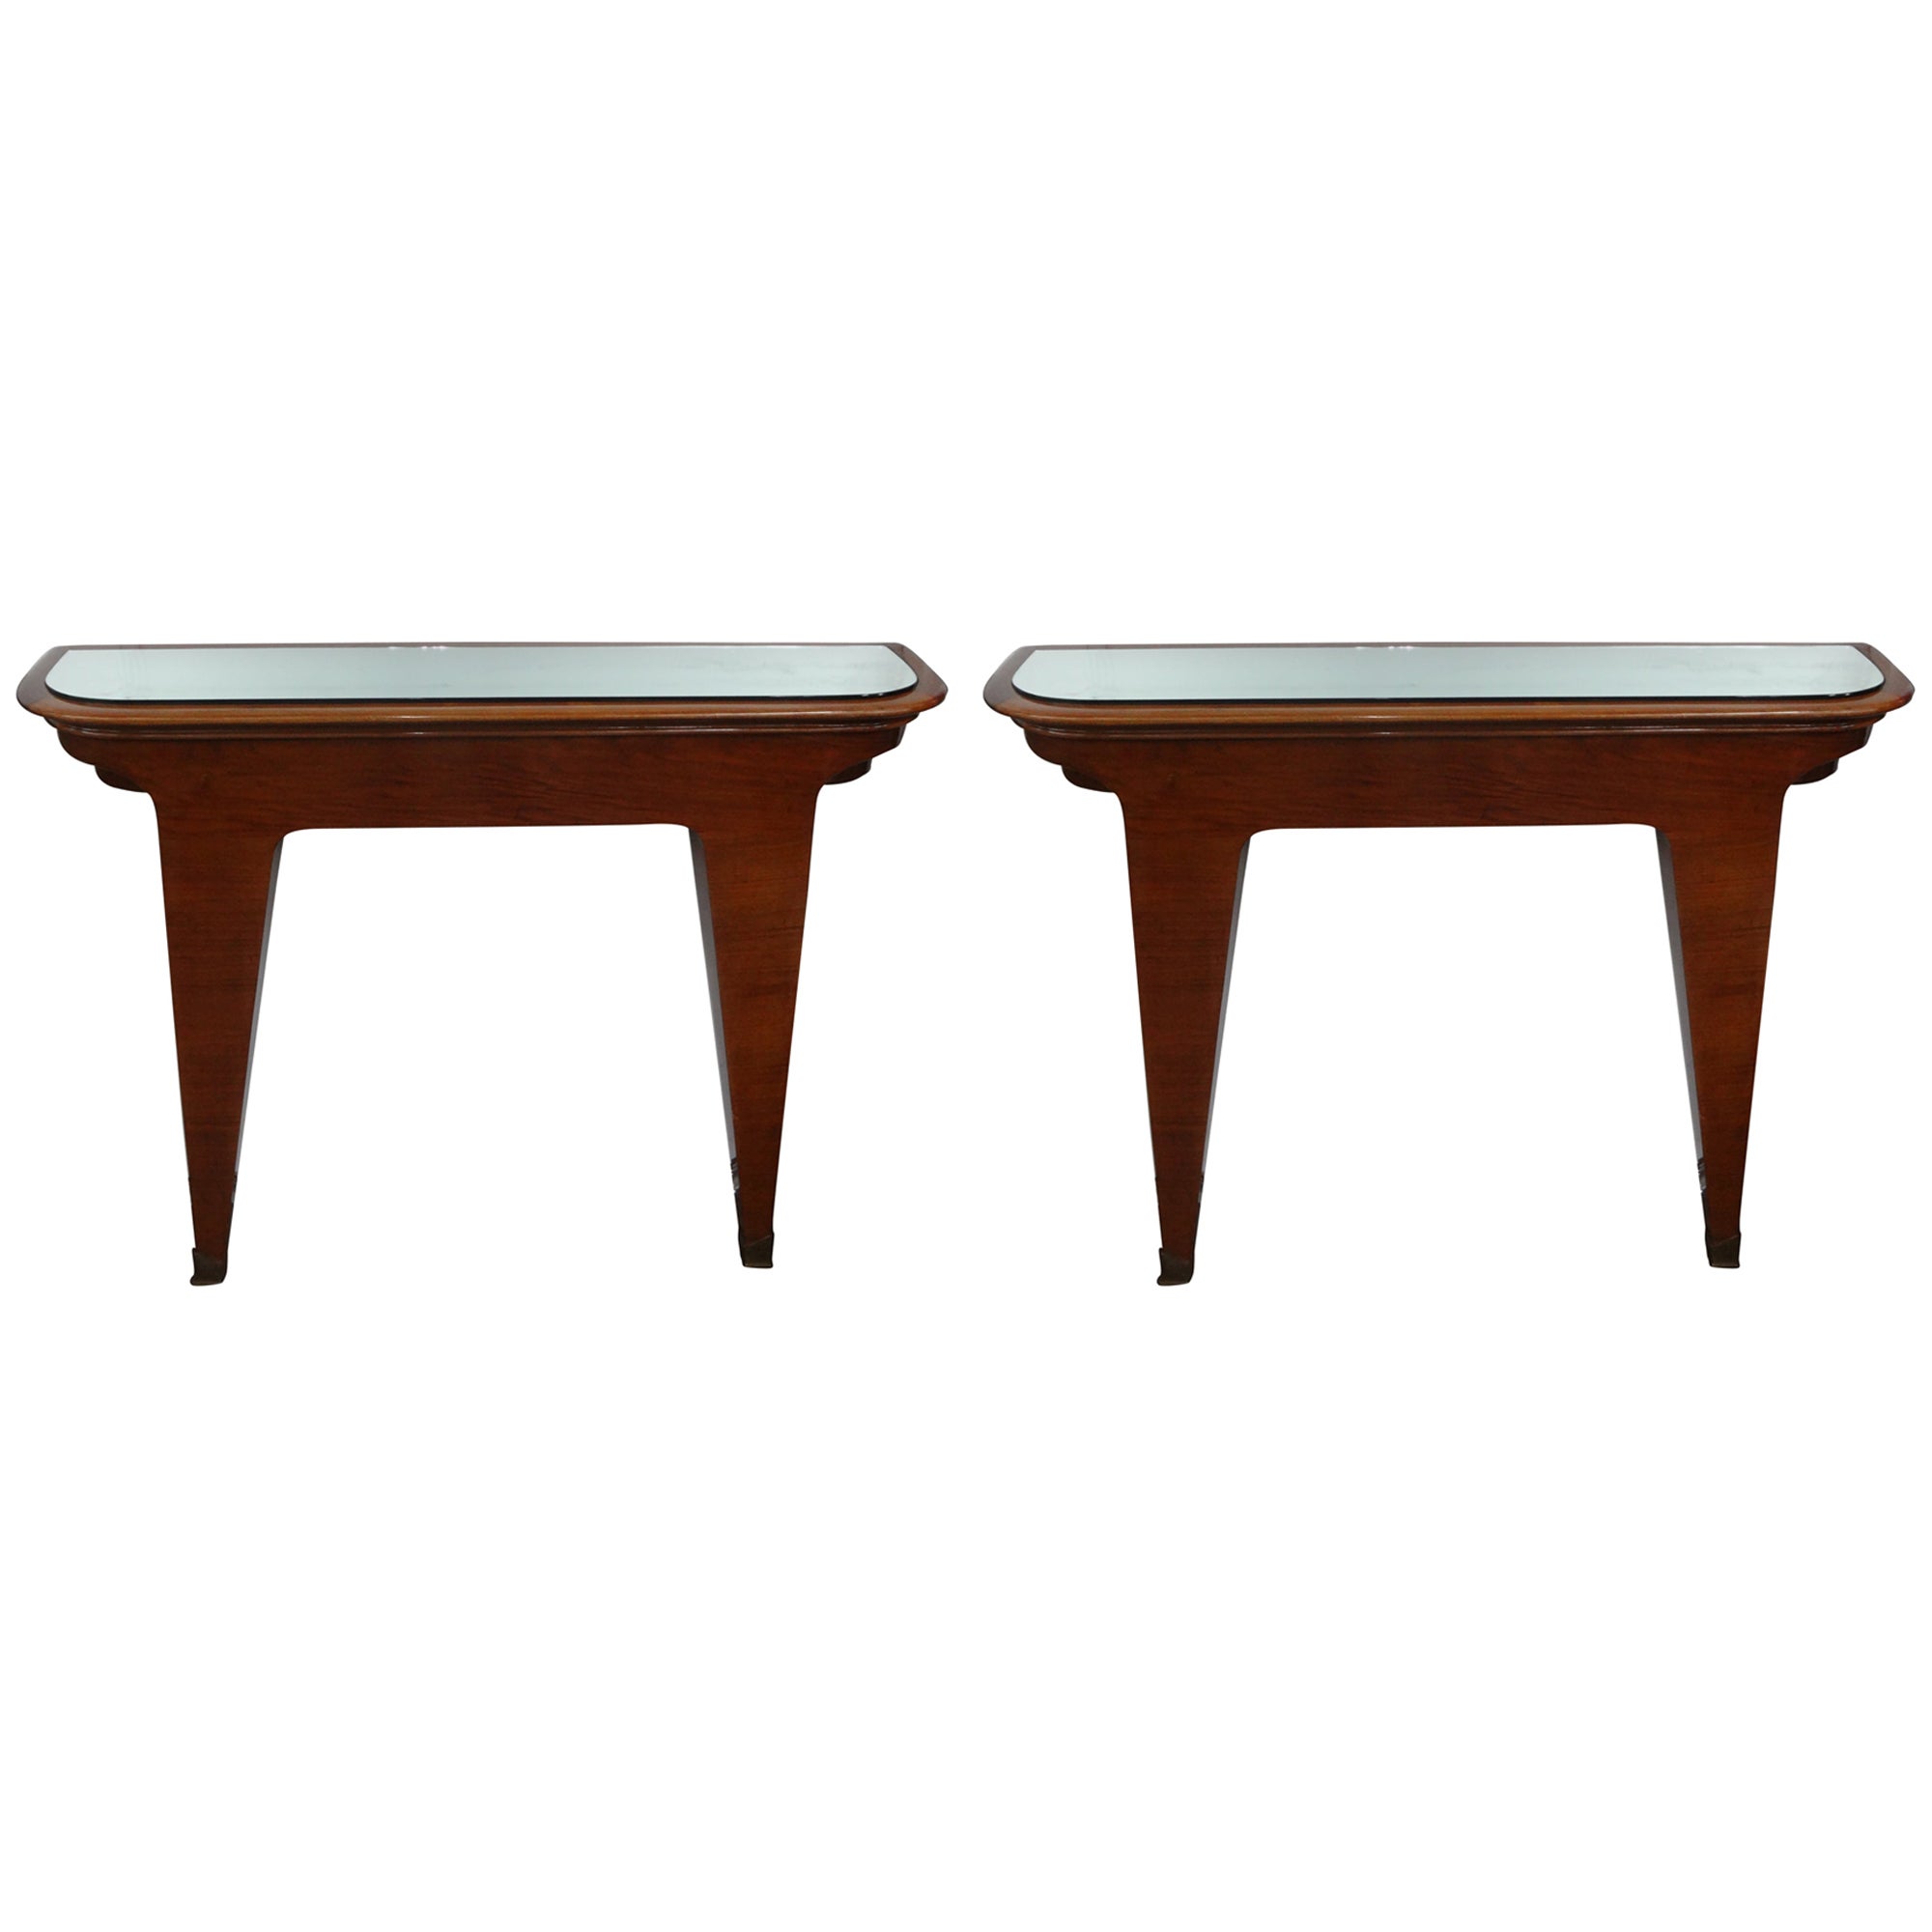 Pair Of Italian Modern Console Tables After Gio Ponti